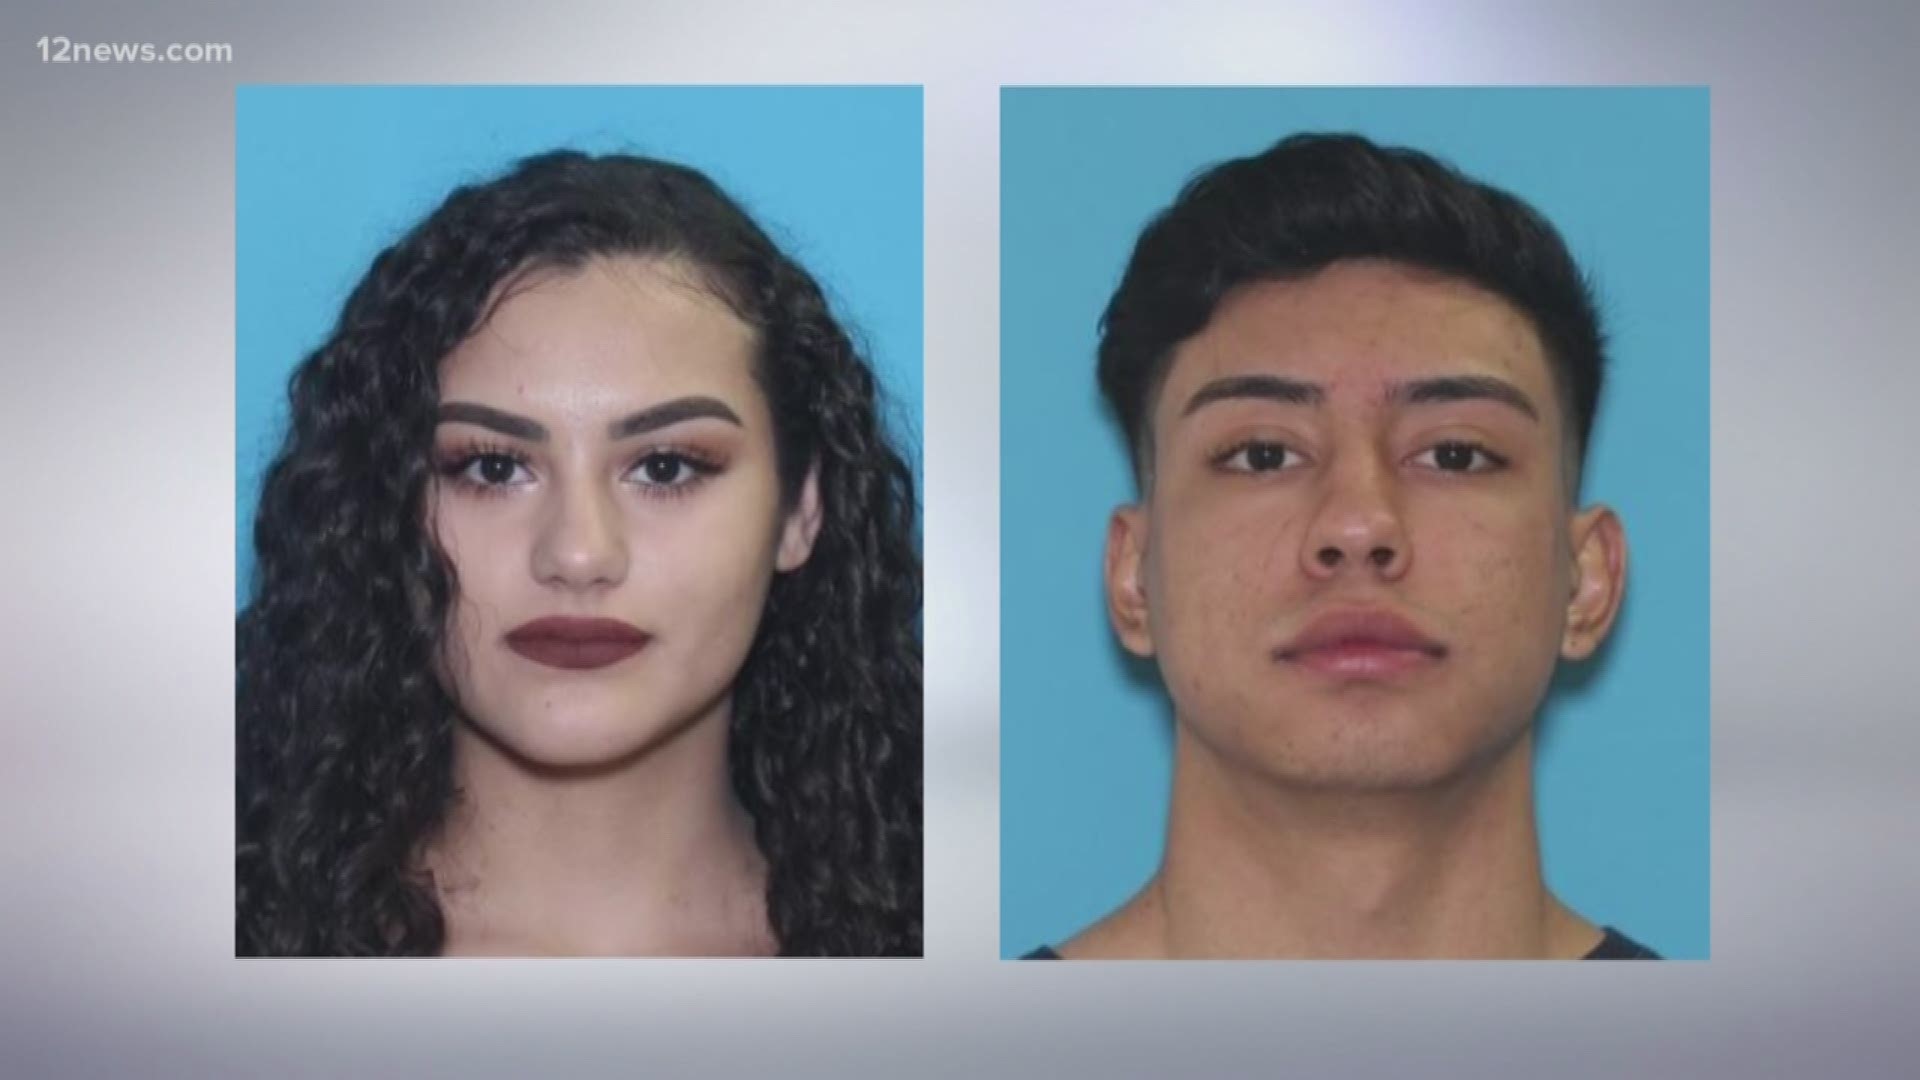 The 17-year-old girl, who police say was kidnapped by 18-year-old Miguel Rodriguez-Perez in Jerome County, Idaho on Sunday, was found in Surprise early Tuesday morning.